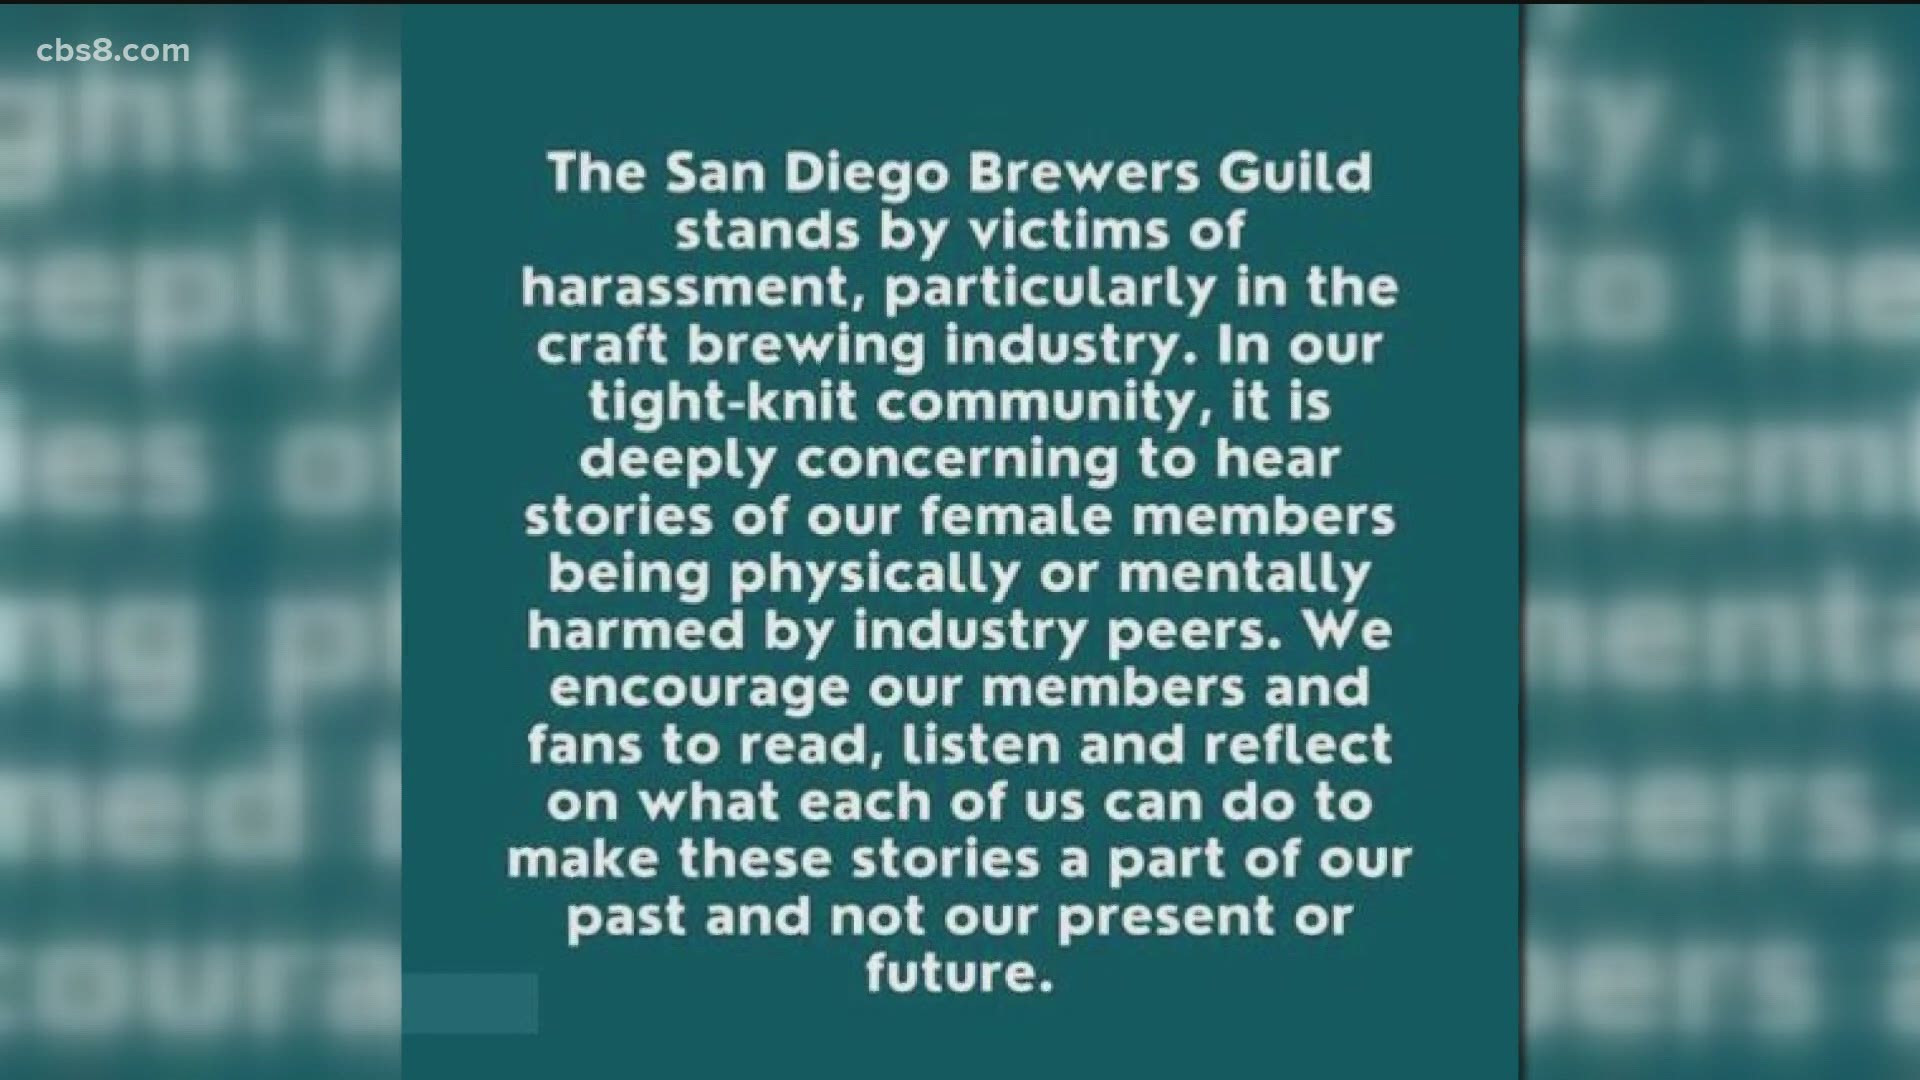 Allegations of sexism, misogyny, harassment, and assault against women in the brewing industry have gone world-wide.